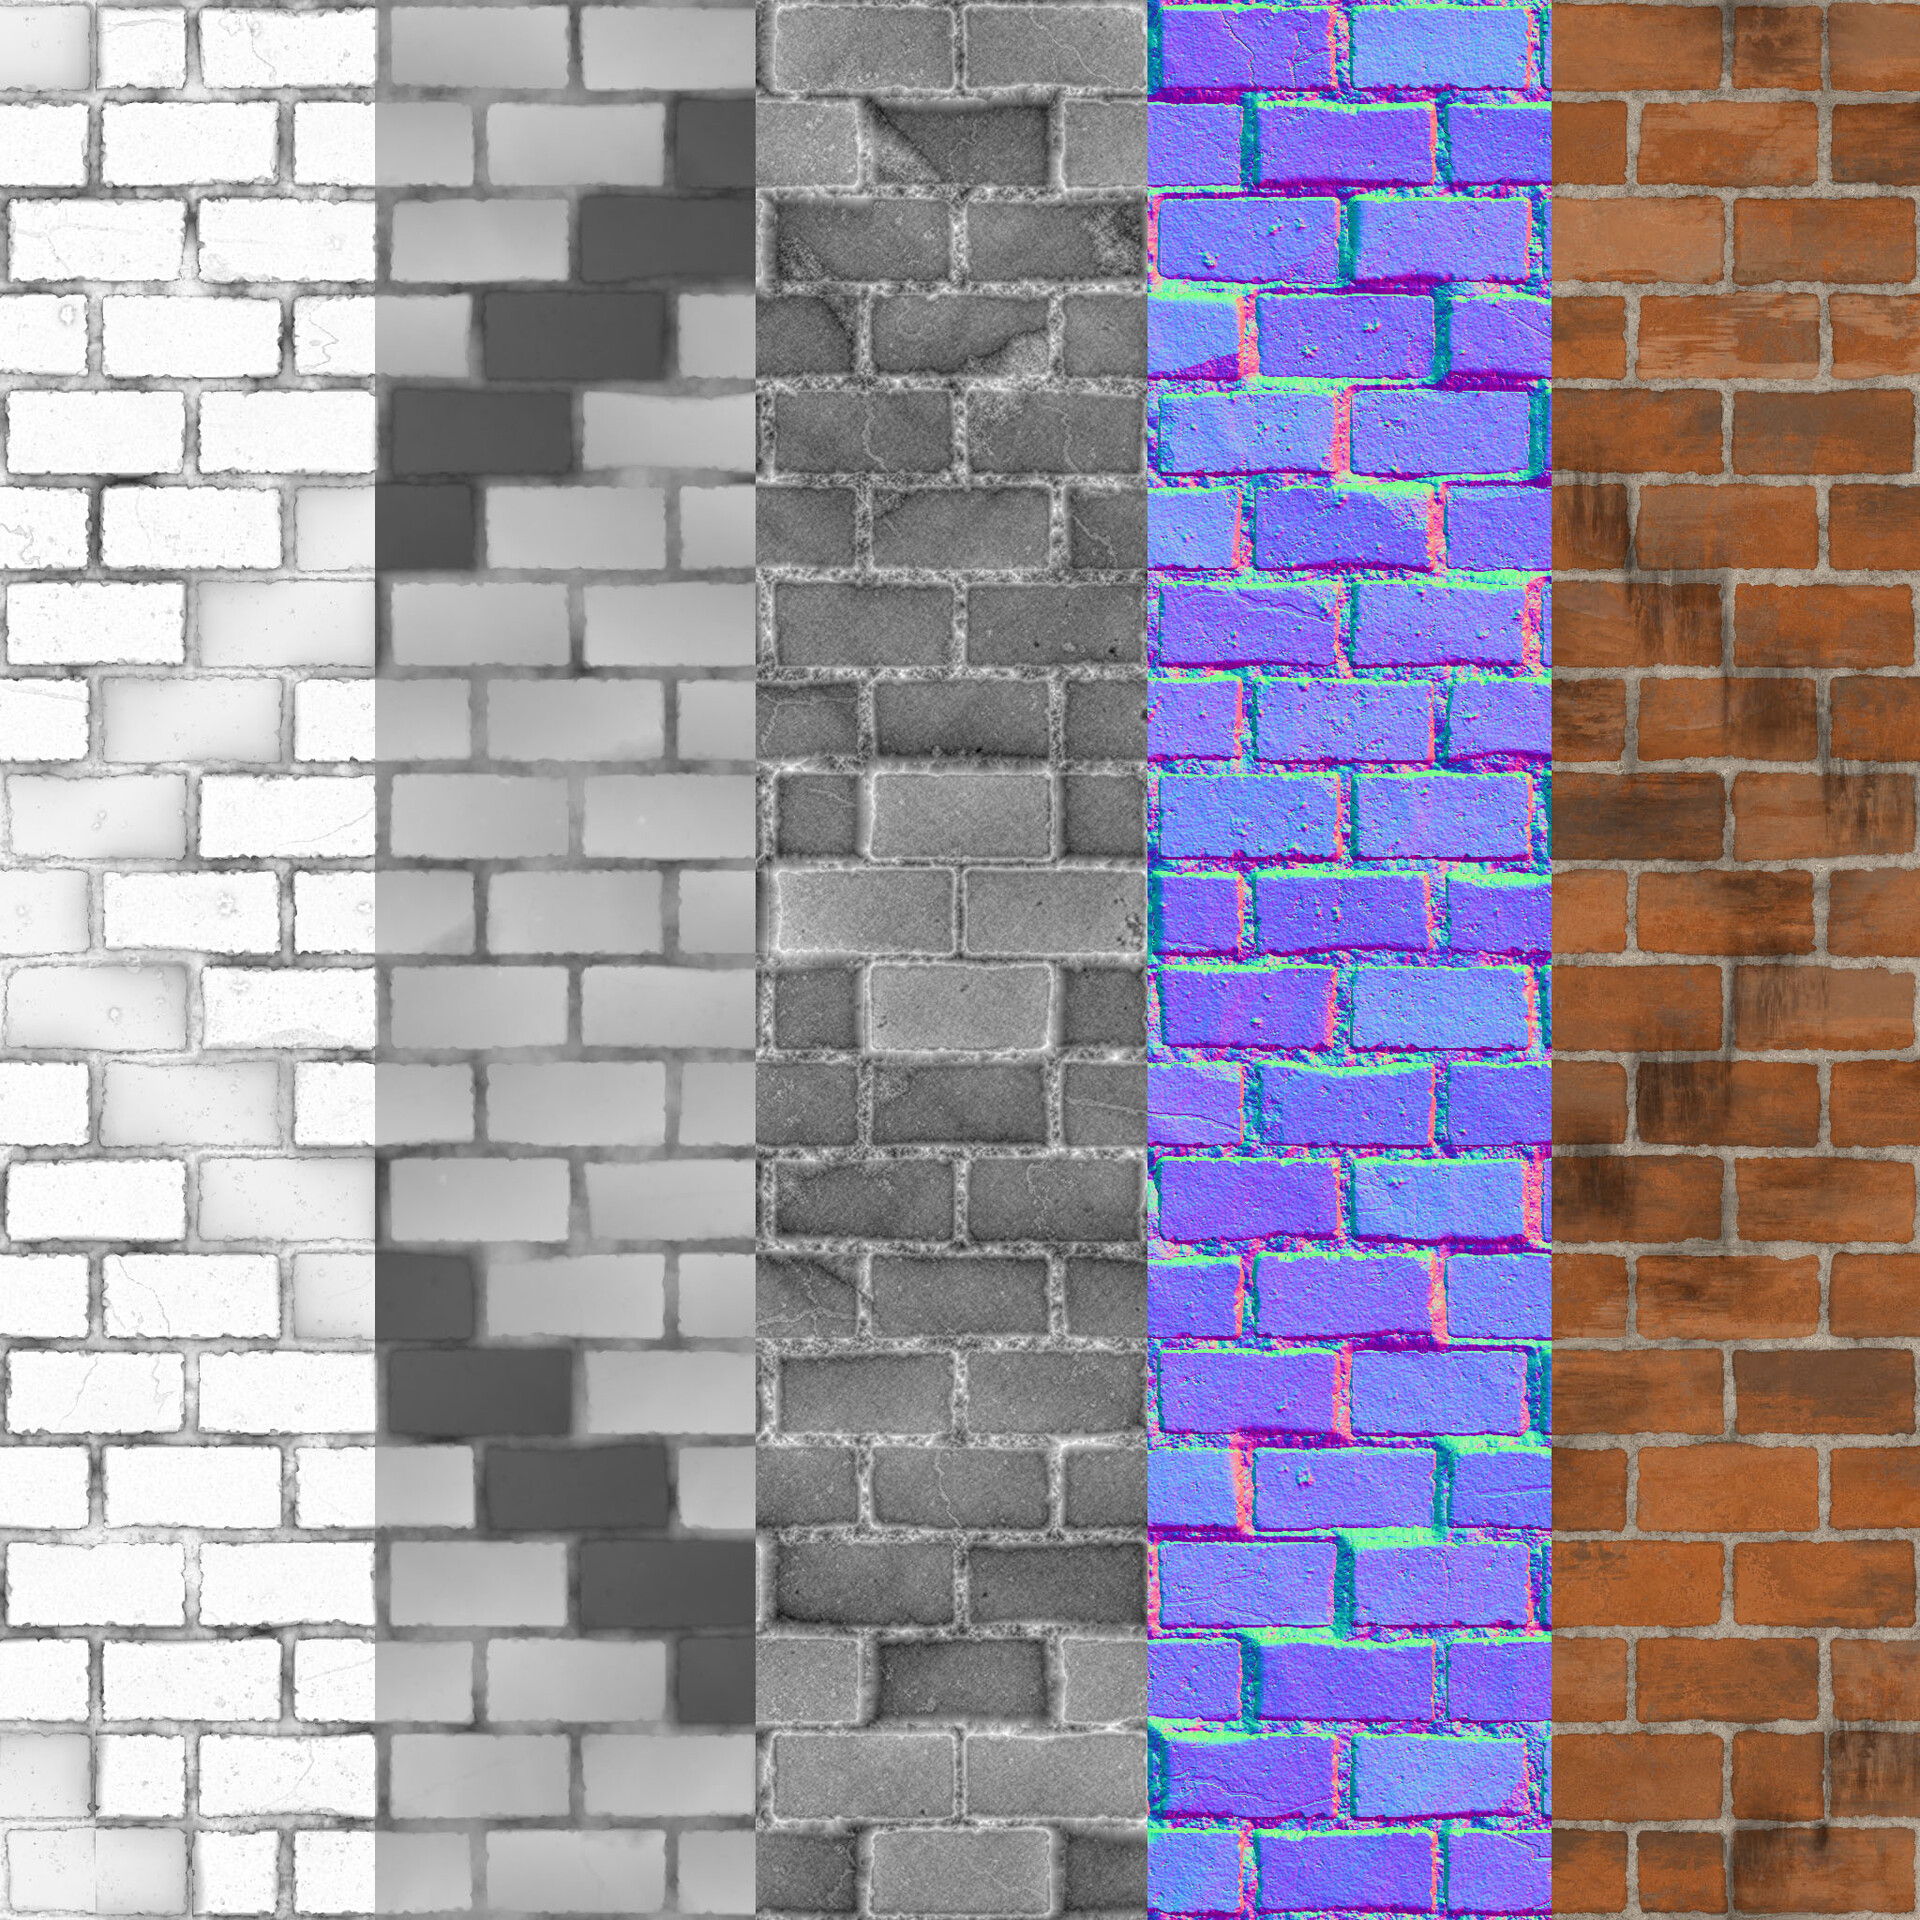 Wall of the brick decorative tiles Royalty Free Vector Image